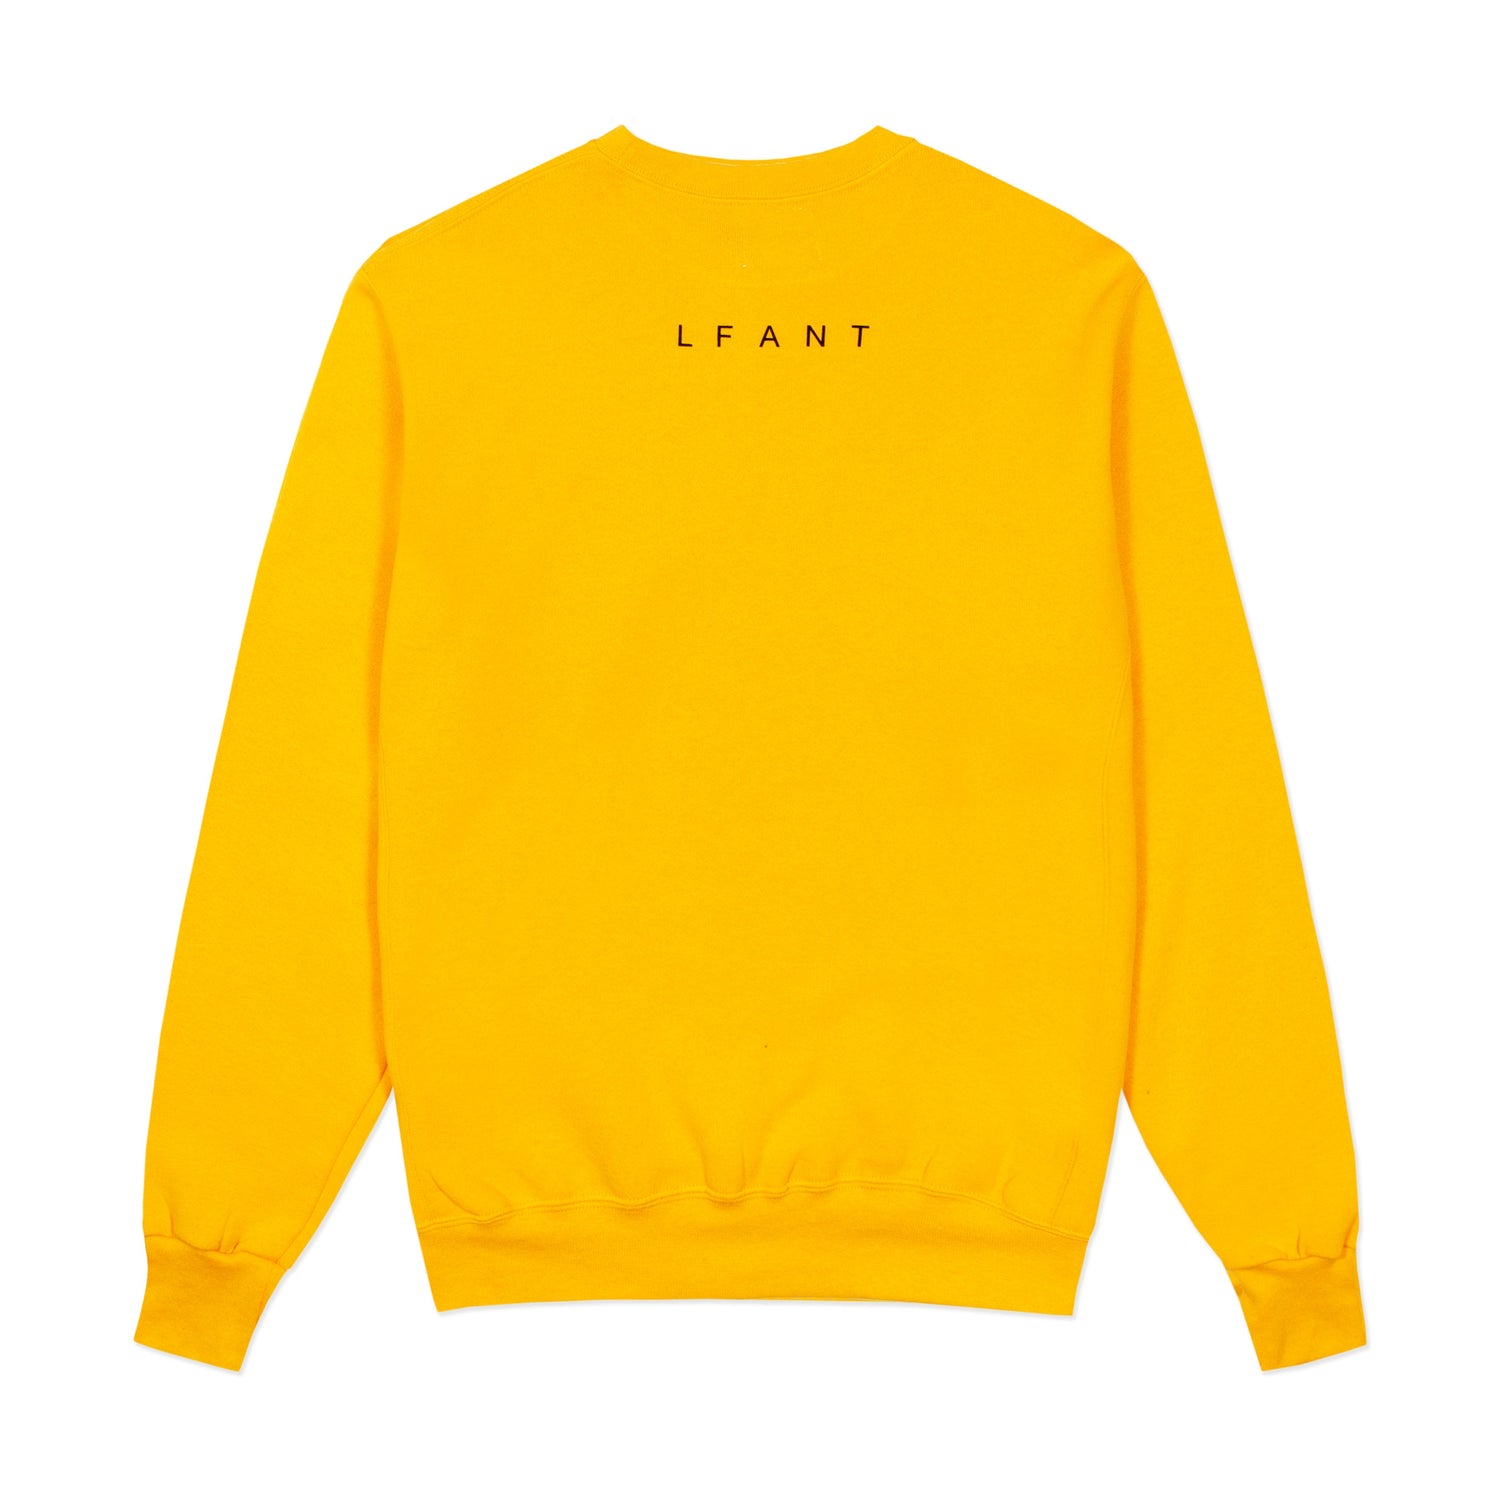 Yellow crewneck with "LFANT" on the back.